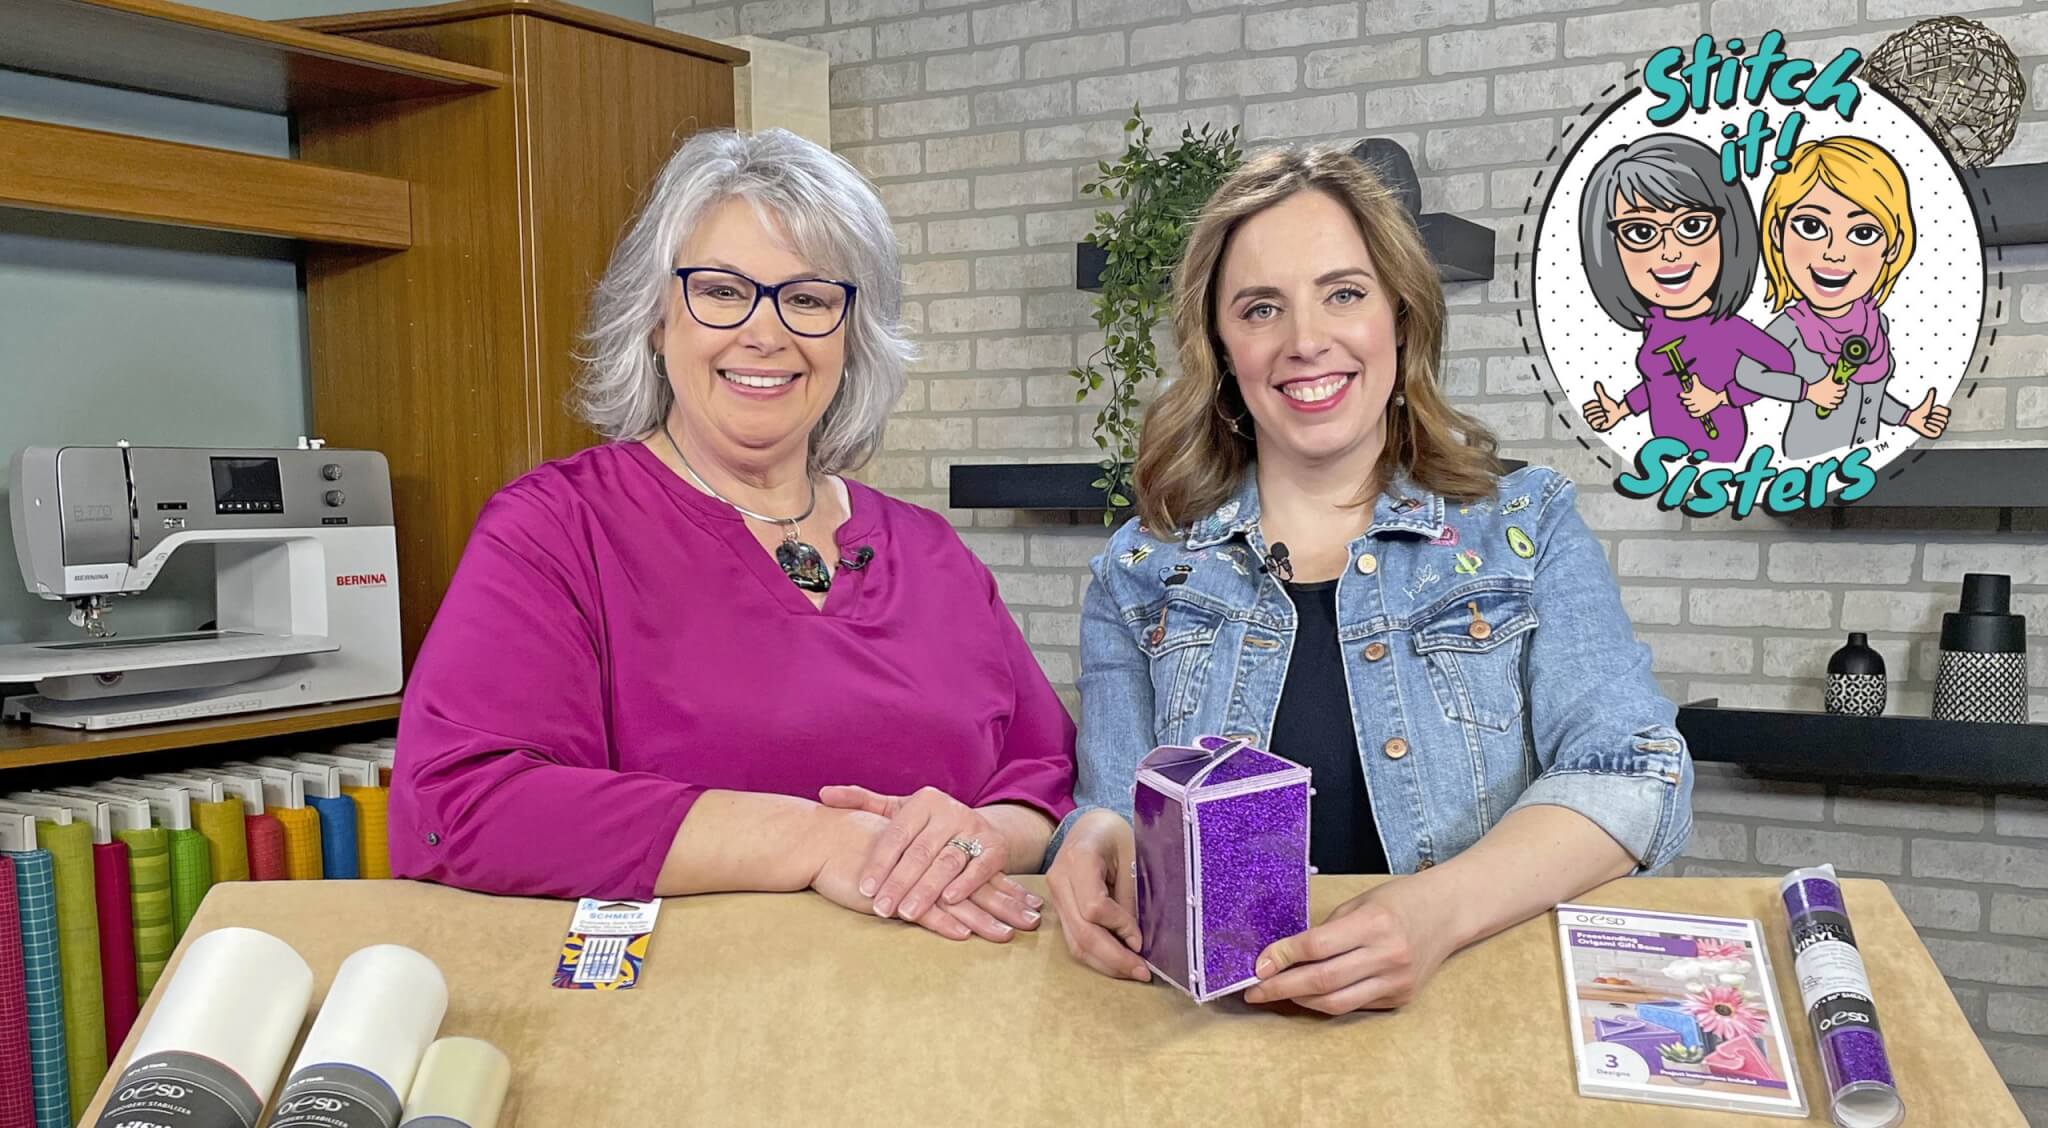 Watch Stitch it! Sisters OESD Origami Gift Box Episode 307 with Deanna Springer and guest Karie Coffey at The Nancy Zieman Productions Blog